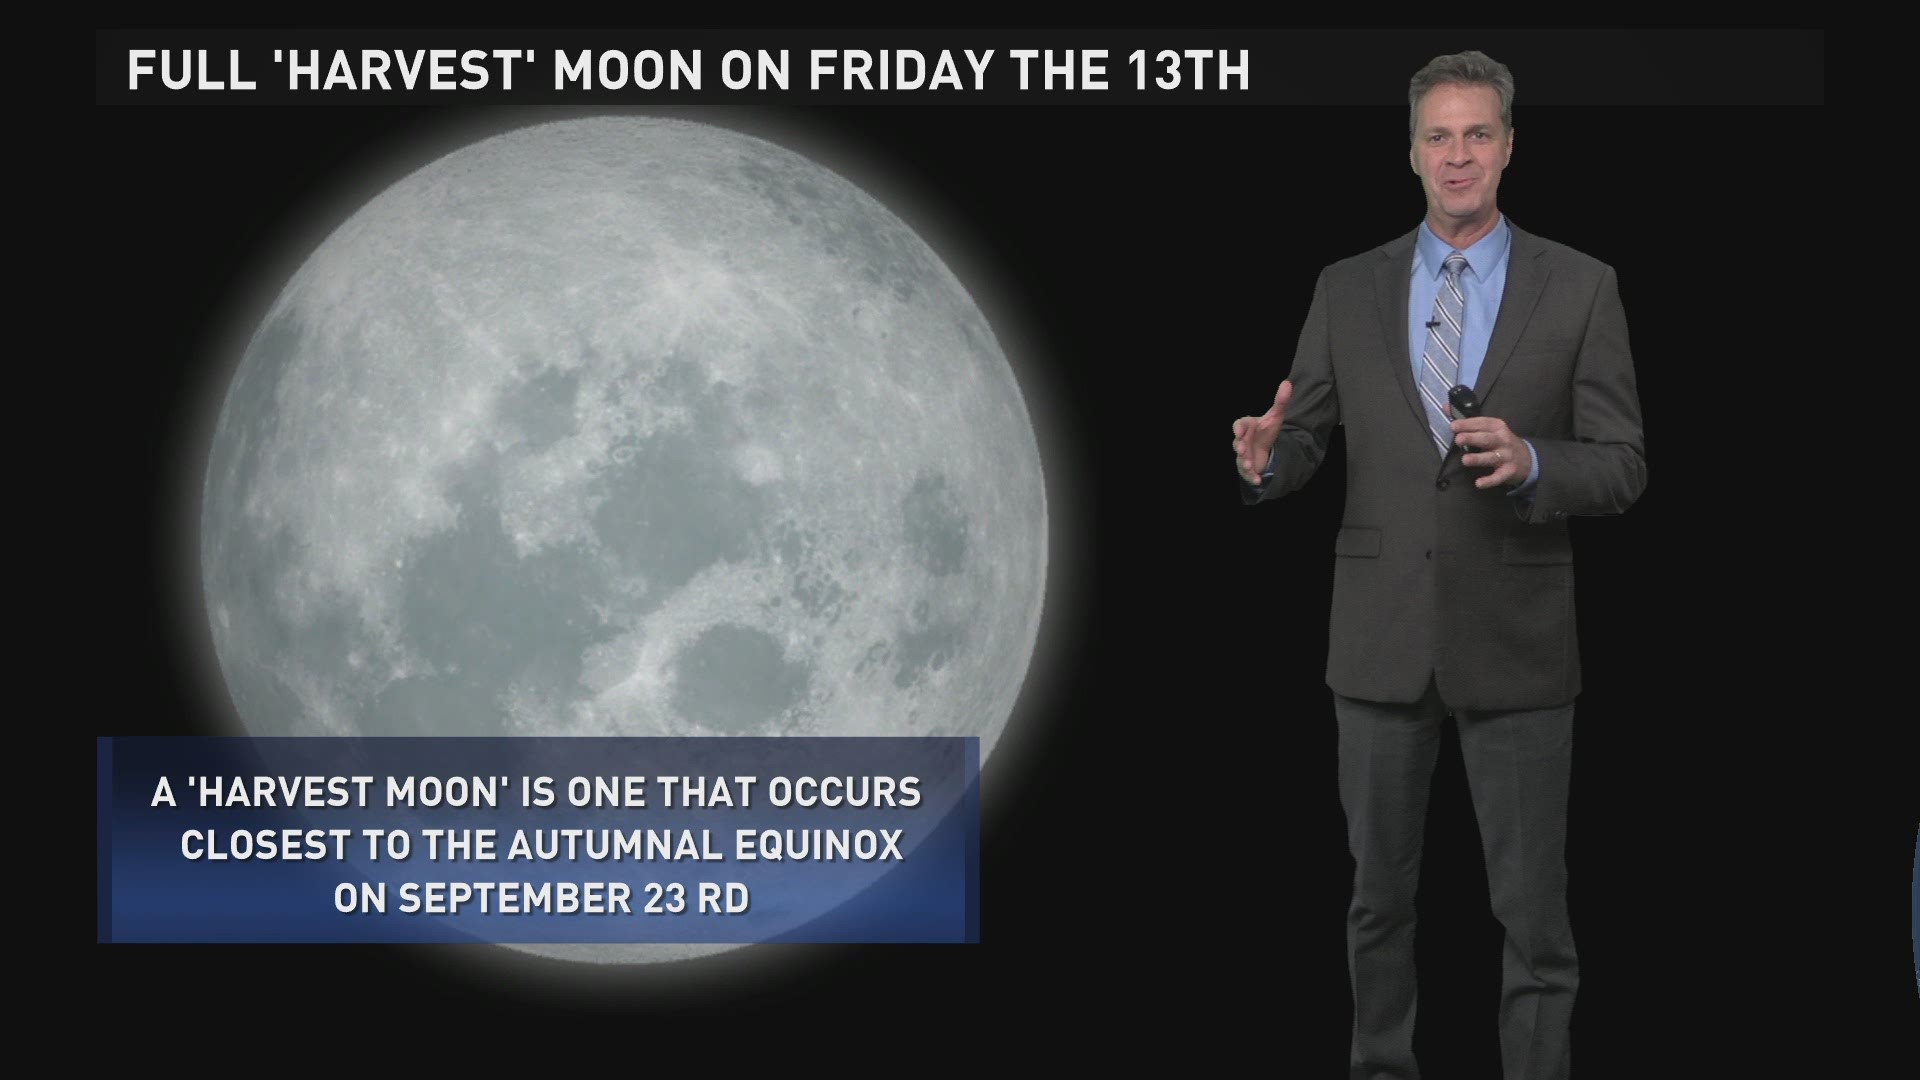 It's a full moon Friday the 13th and the next one won't happen for 30